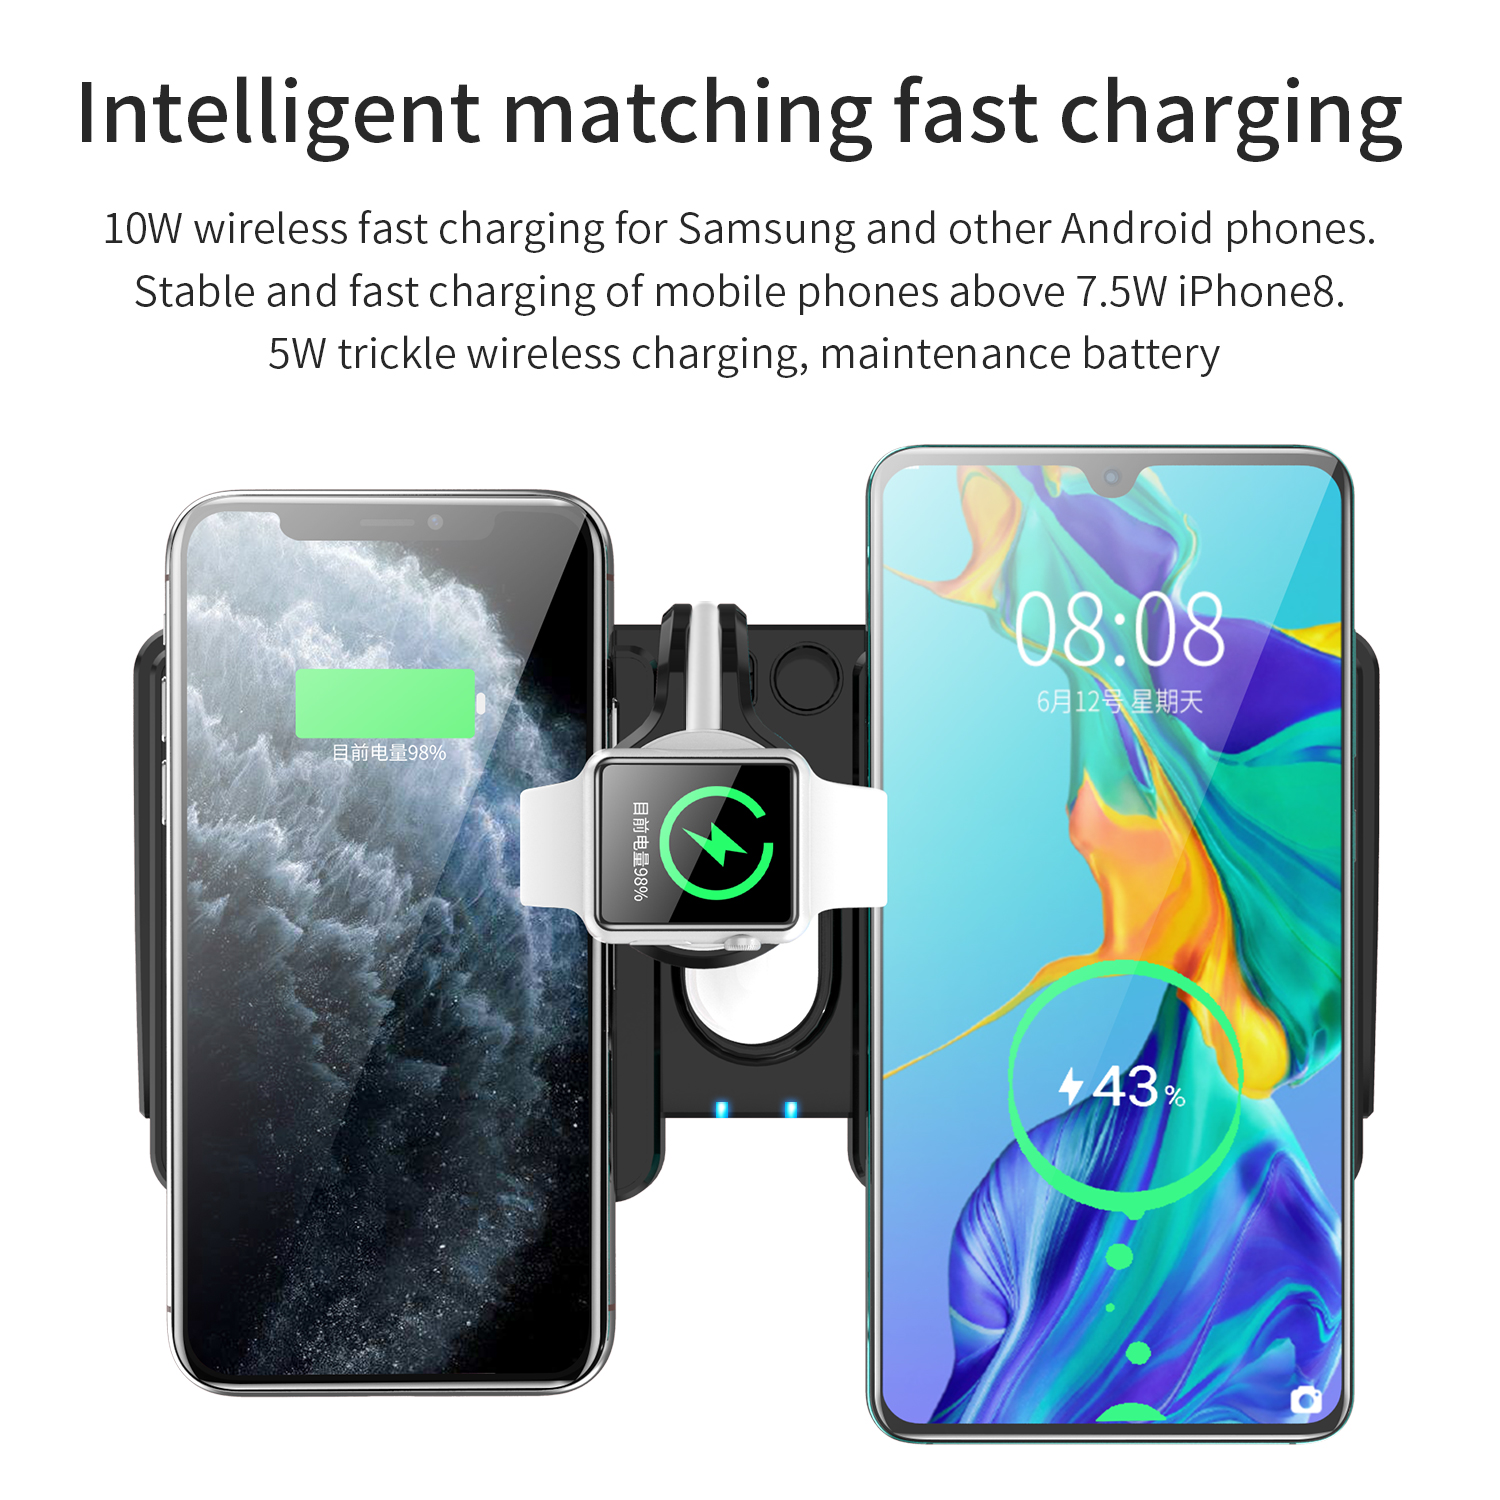 wireless charger for Apple Watch iWatch 5 4 3 2 1, Airpods,iPhone 11 11 Pro X Xs XR Max 8 Plus 8,Samsung Galaxy S9 S8